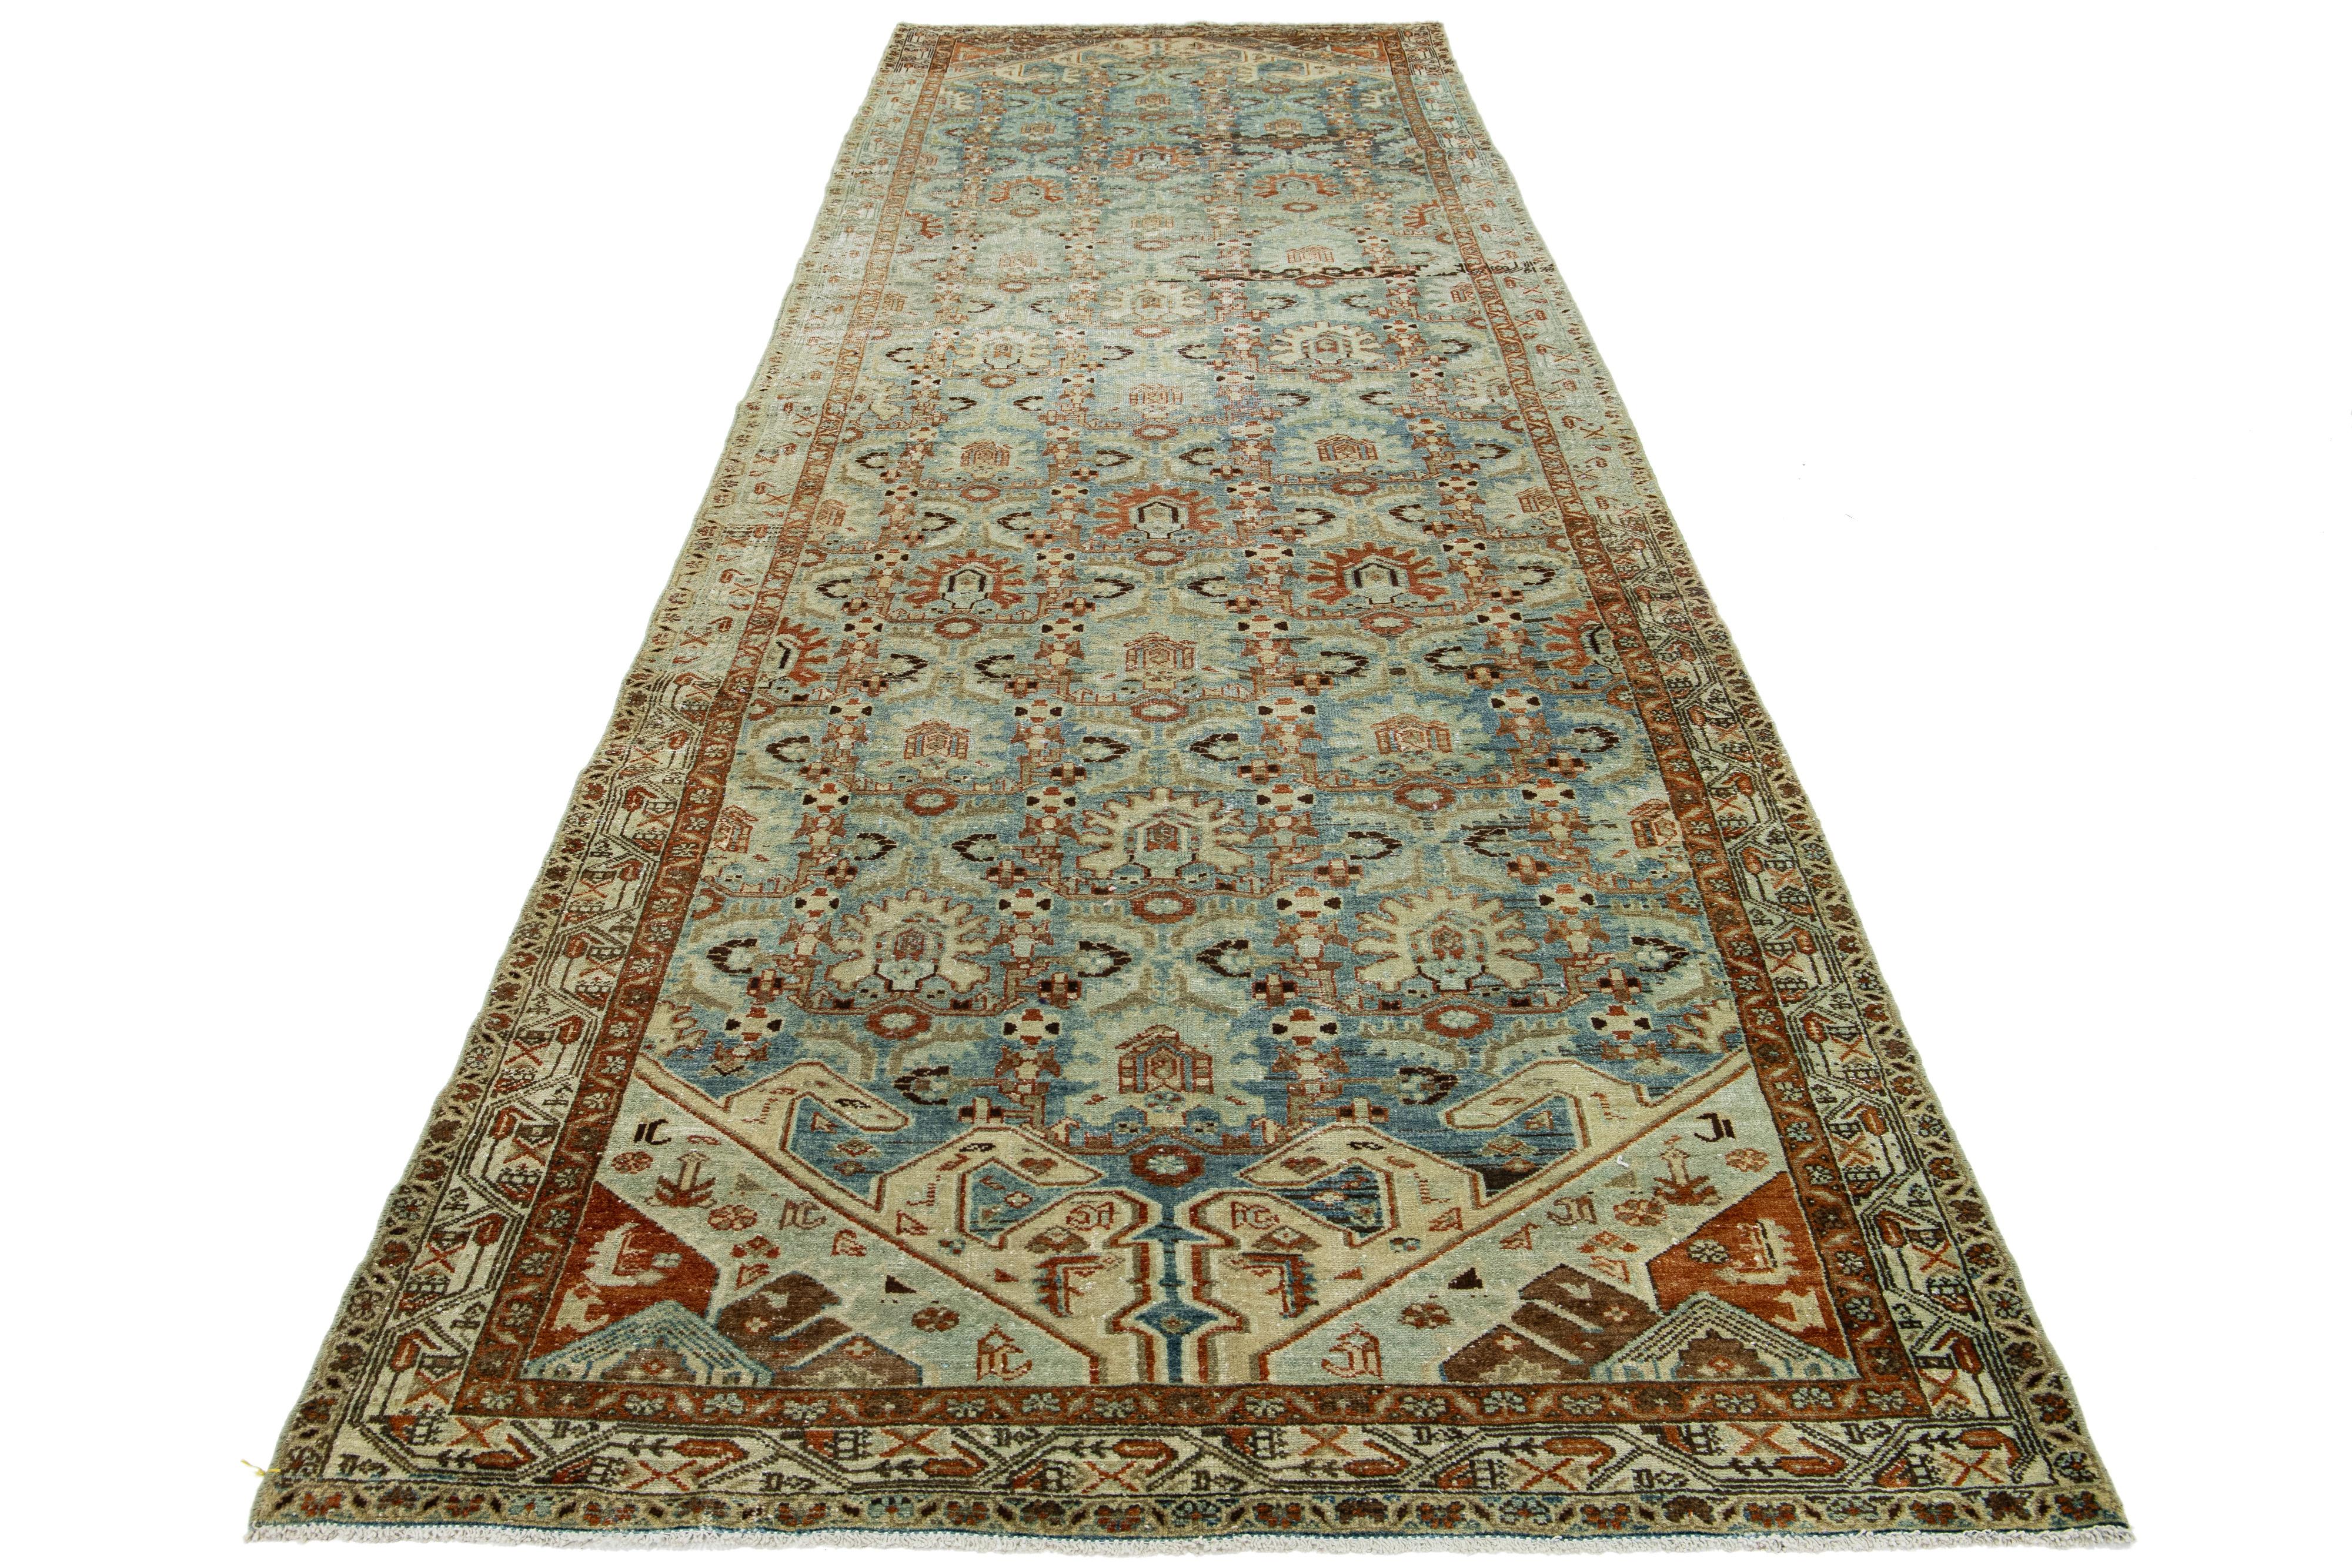 Antique Hamadan Persian runner with premium wool and captivating all-over design in beige and rust accents on a light blue background.

This rug measures 4'11